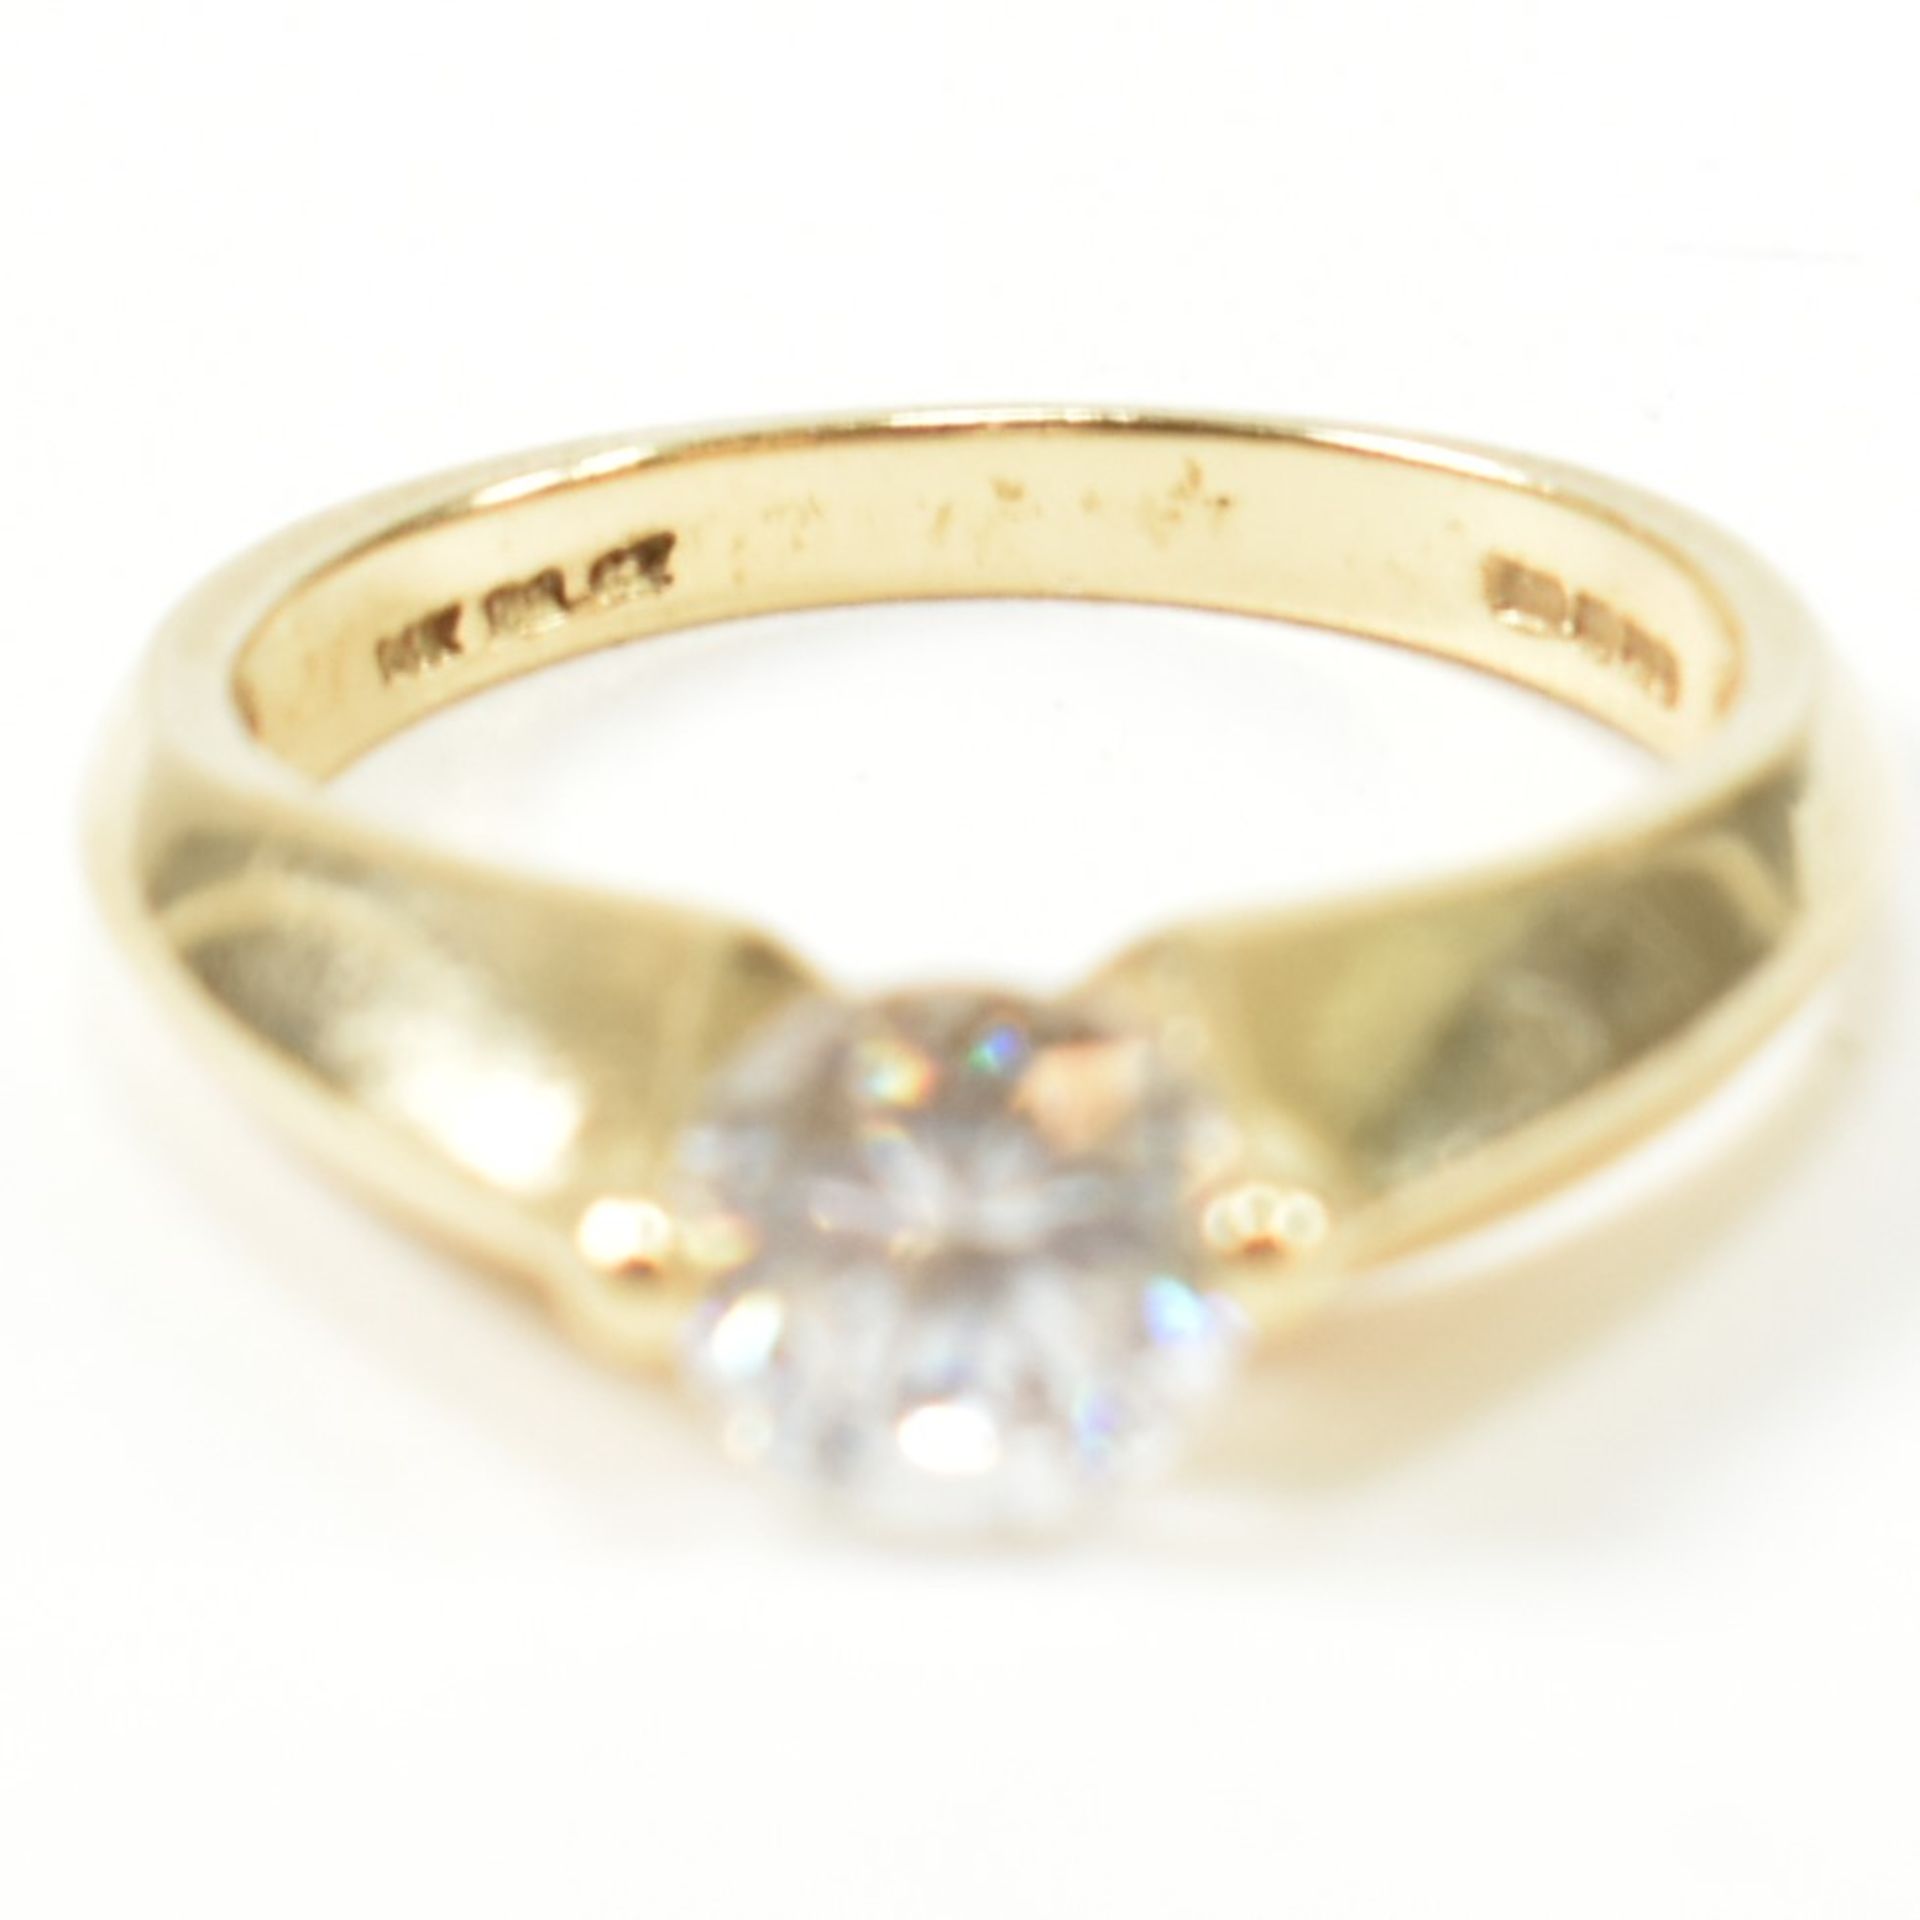 HALLMARKED 14CT GOLD & CZ SOLITAIRE RING - Image 2 of 11